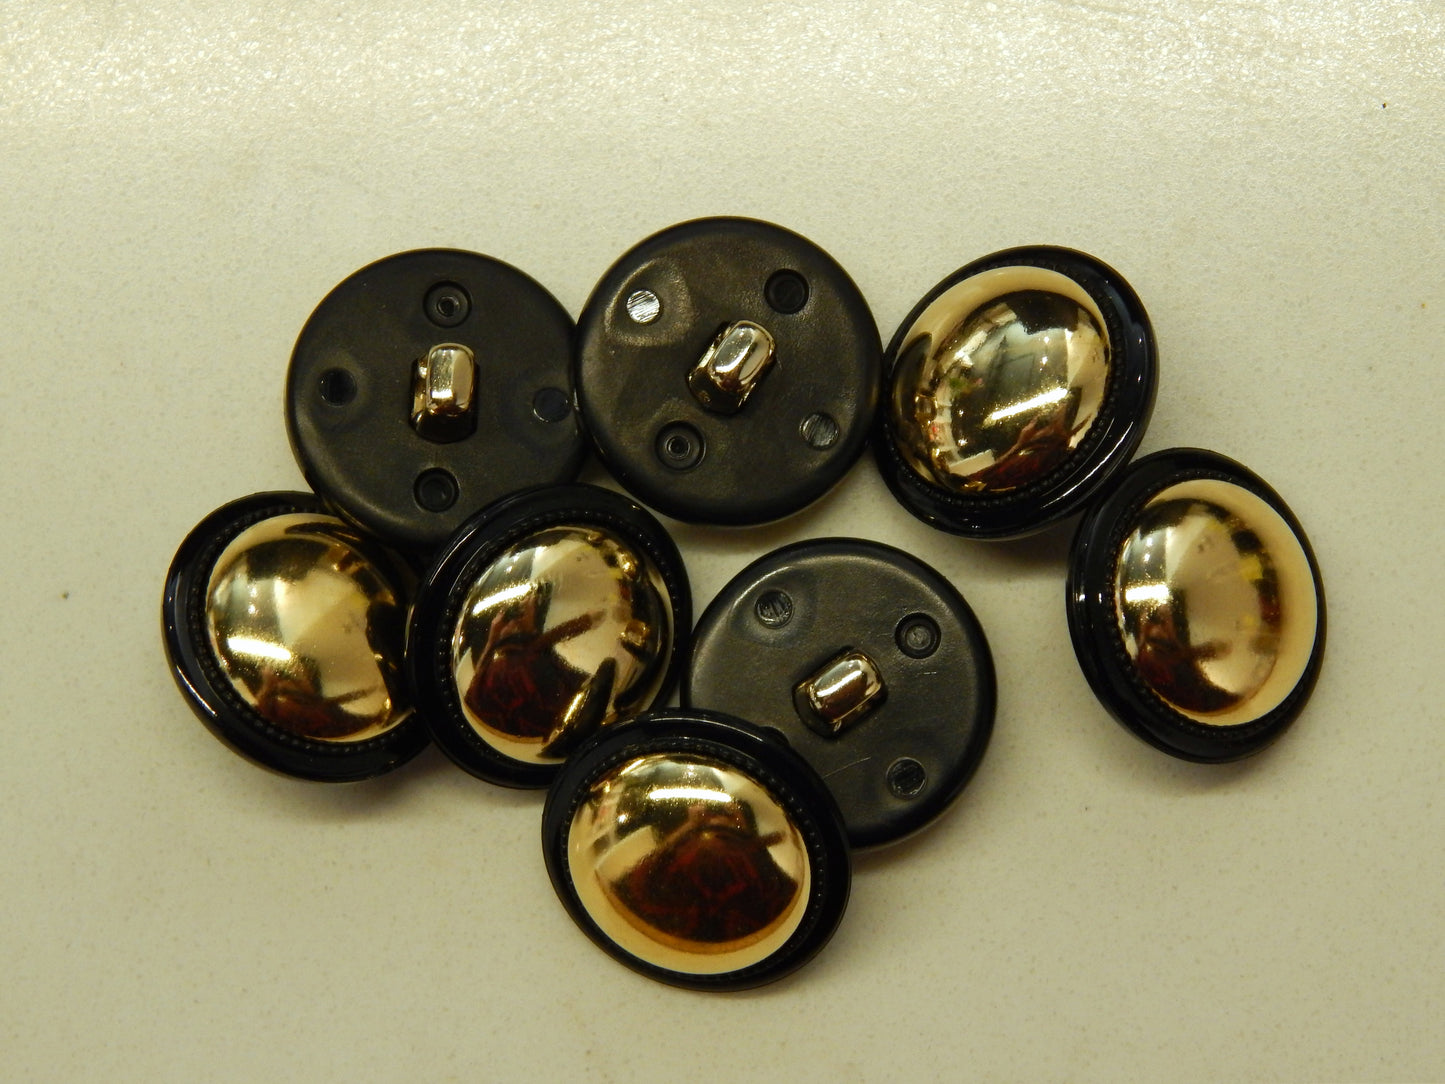 Black and Gold Bauble Buttons - 3/4"